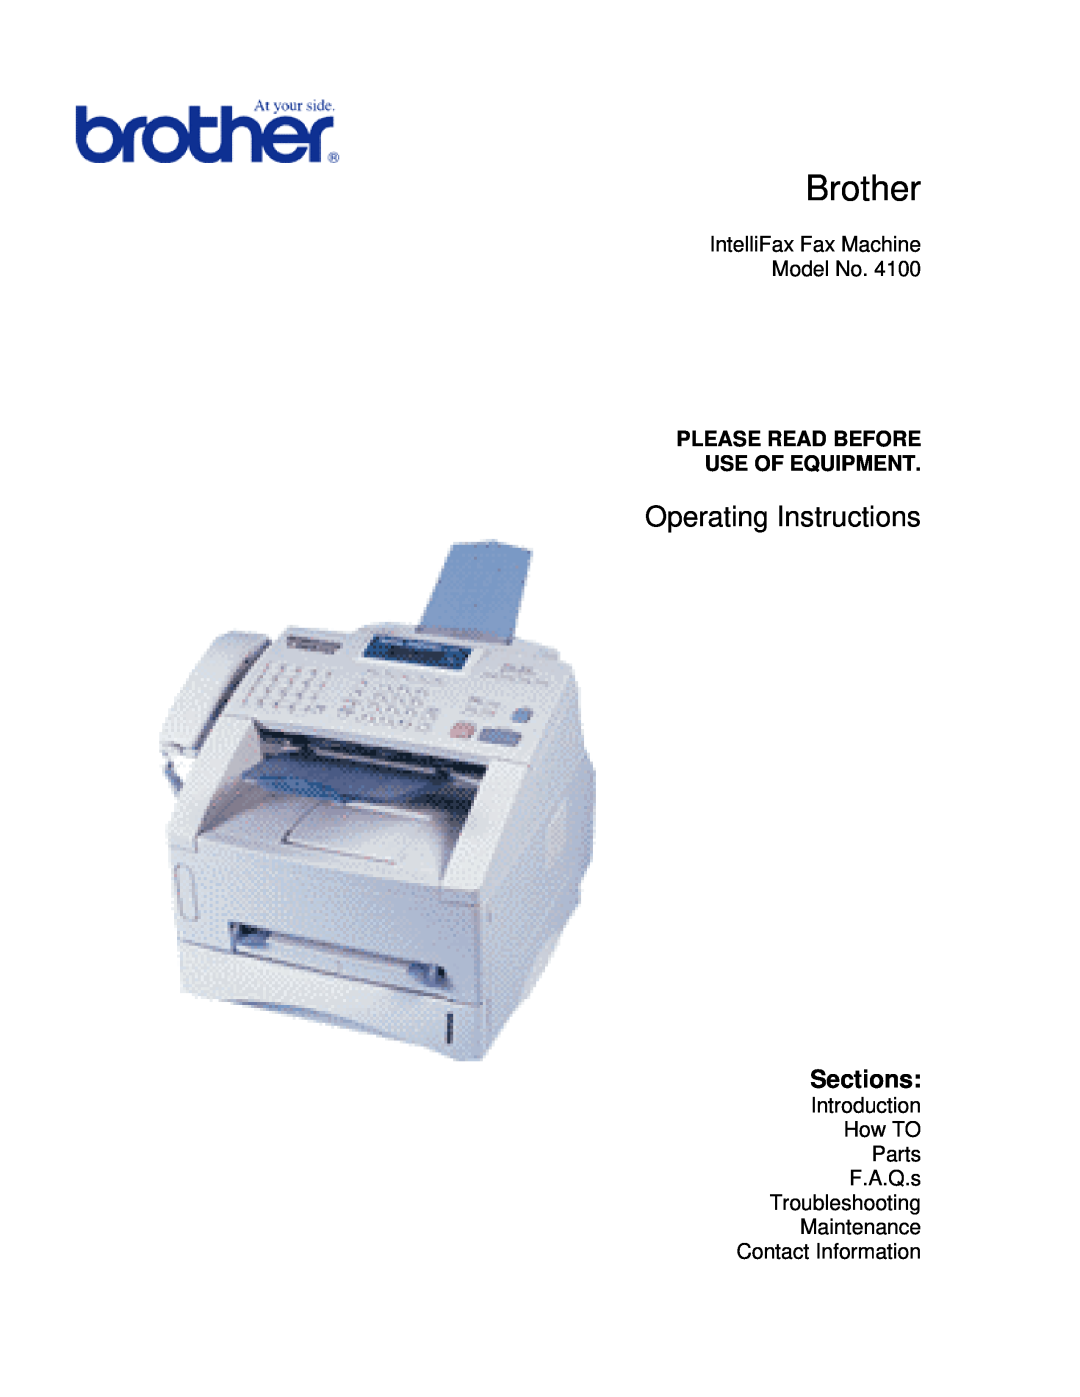 Brother 4100 manual Brother, Sections, Operating Instructions, IntelliFax Fax Machine Model No, Contact Information 